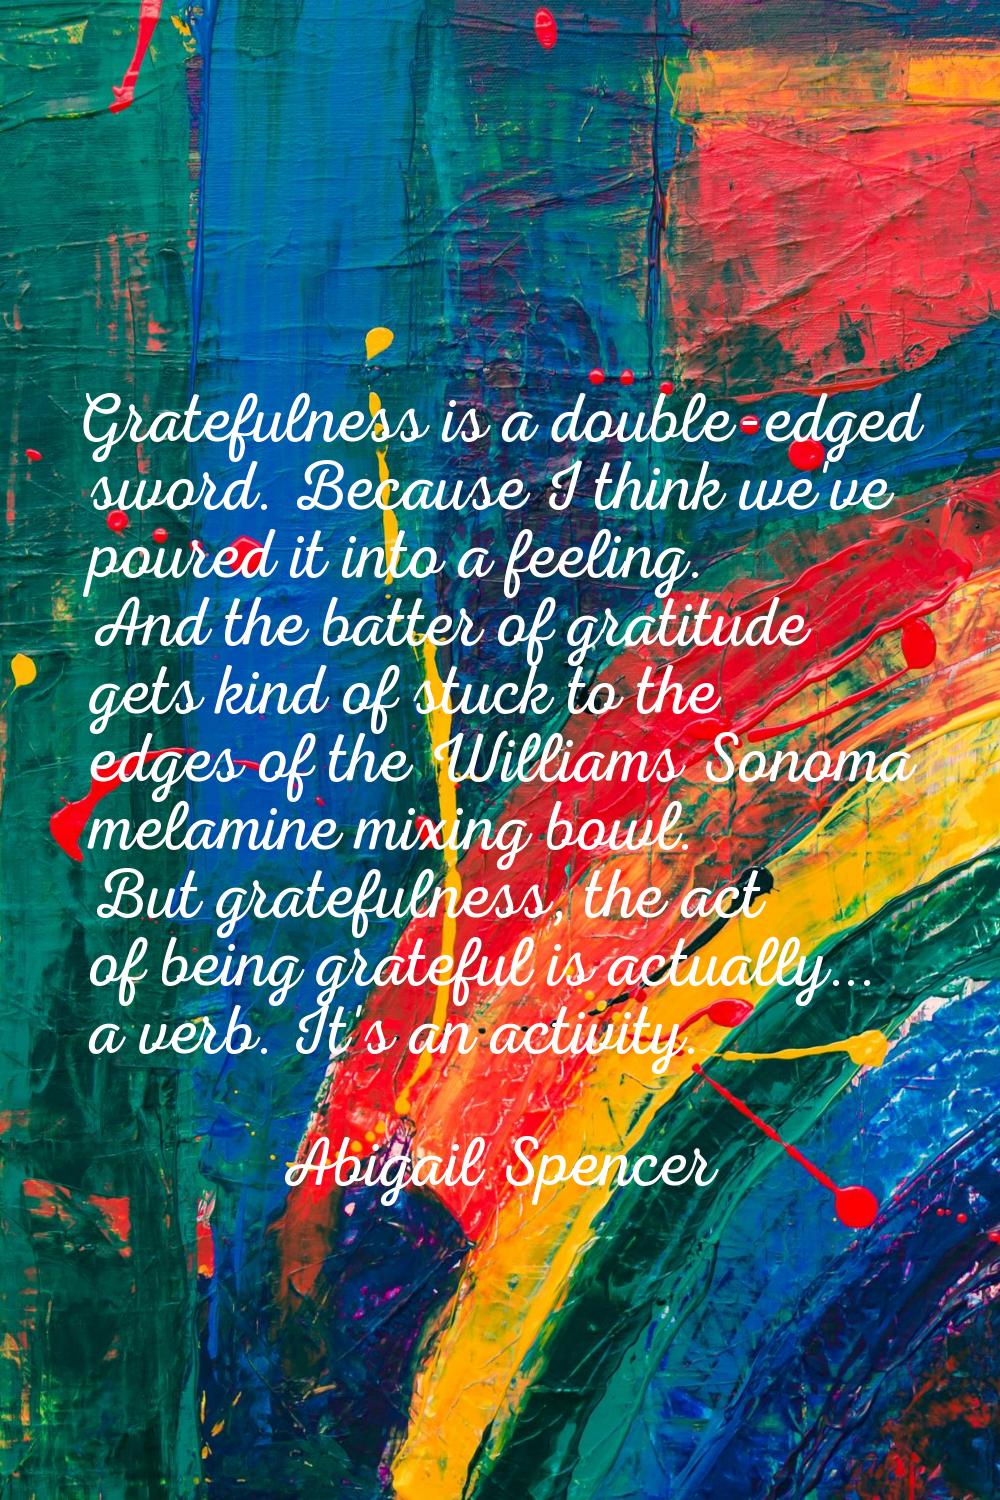 Gratefulness is a double-edged sword. Because I think we've poured it into a feeling. And the batte